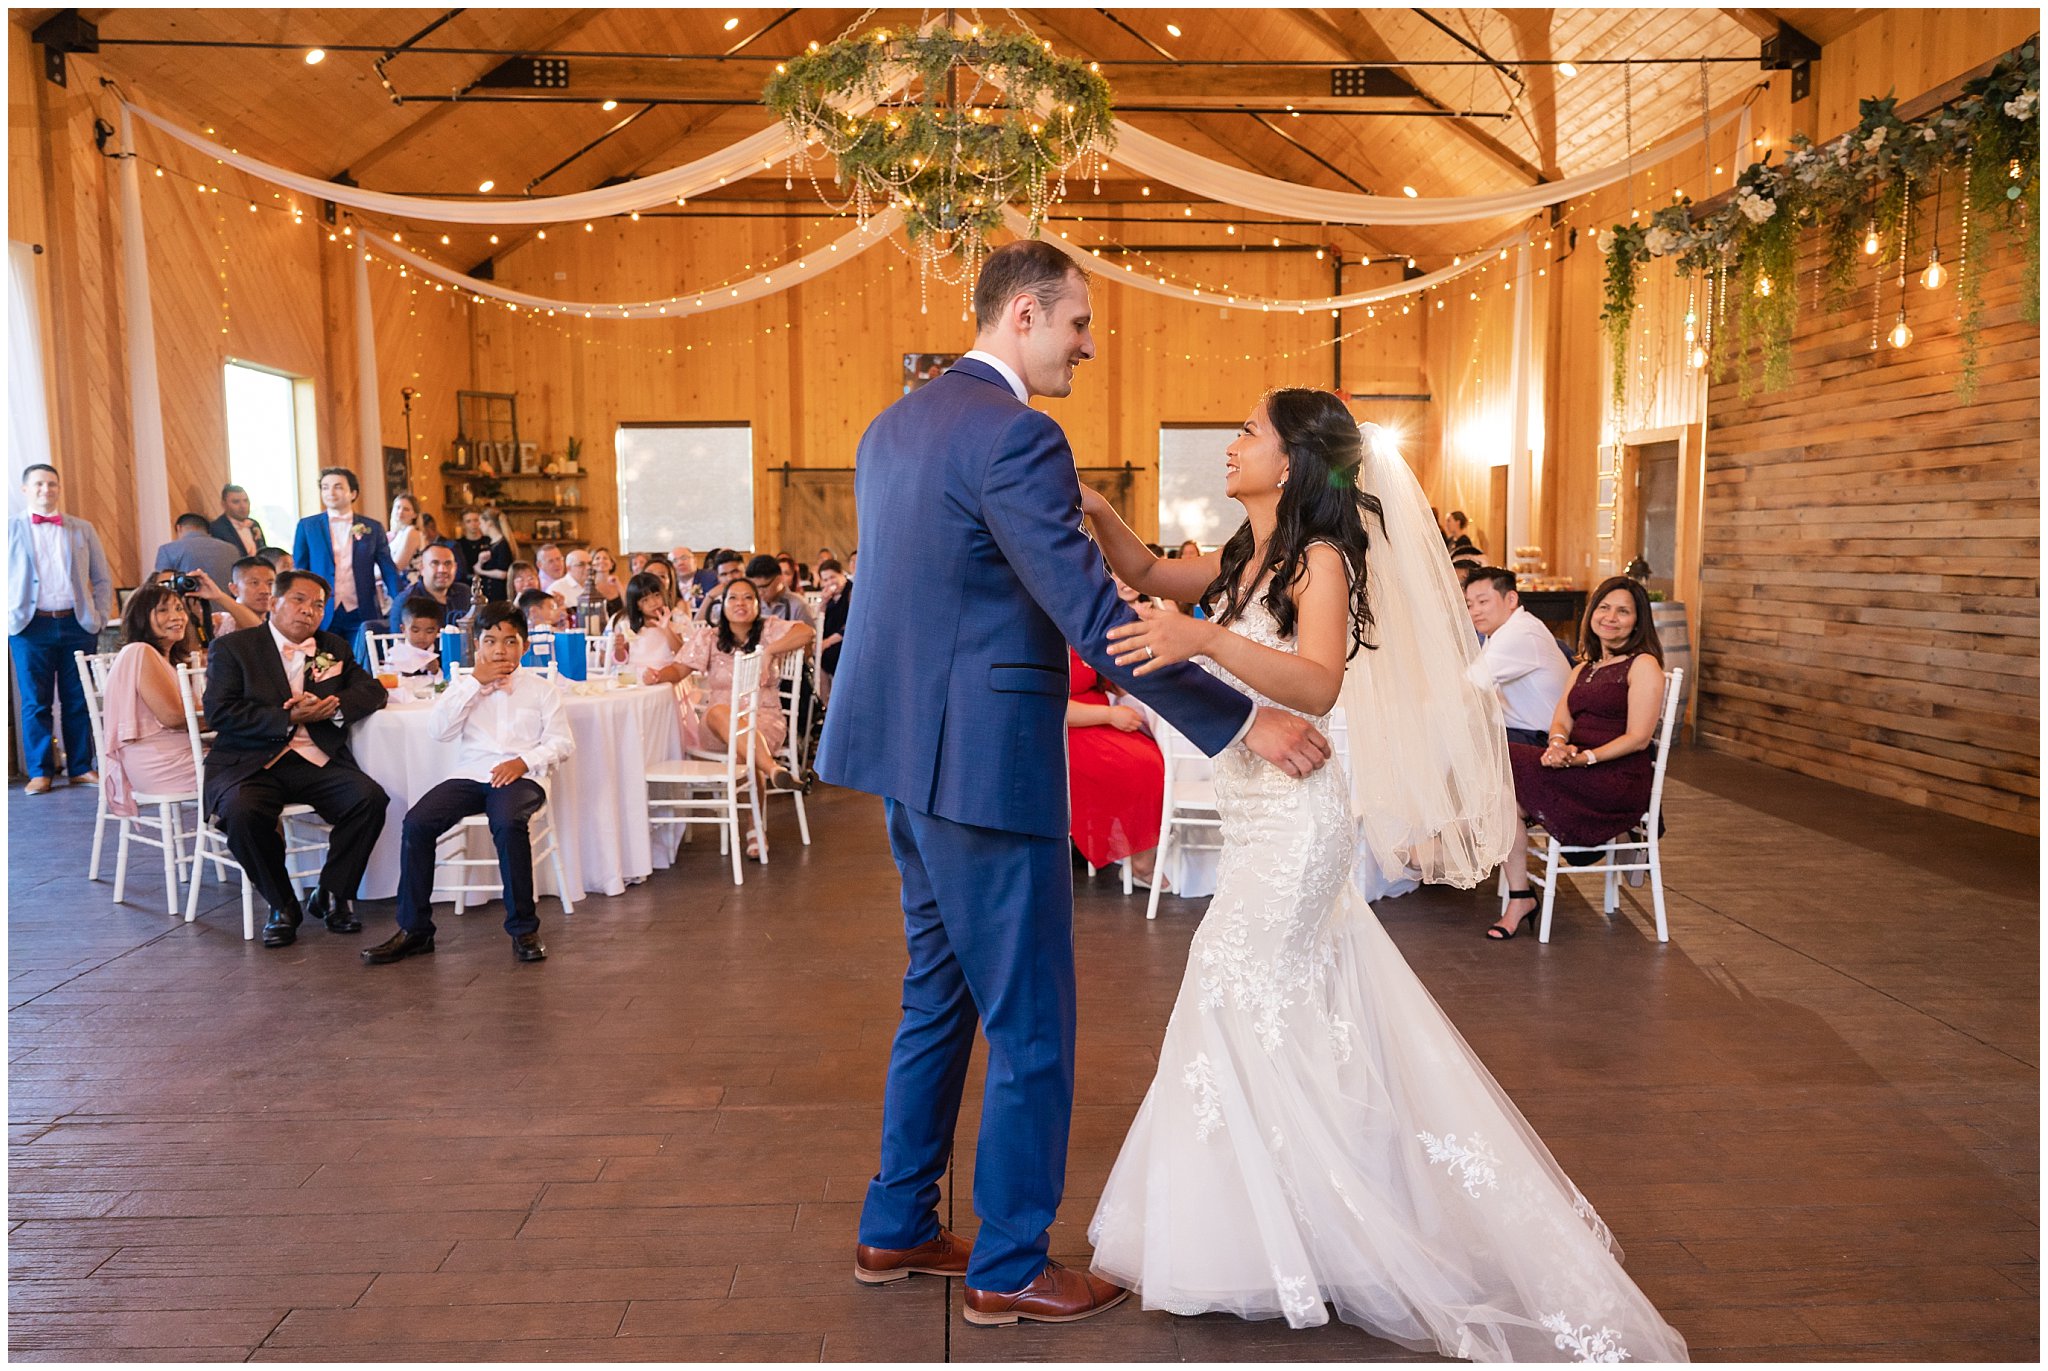 First dance, mother-son and father-daughter dances in the barn | Oak Hills Utah Destination Wedding | Jessie and Dallin Photography